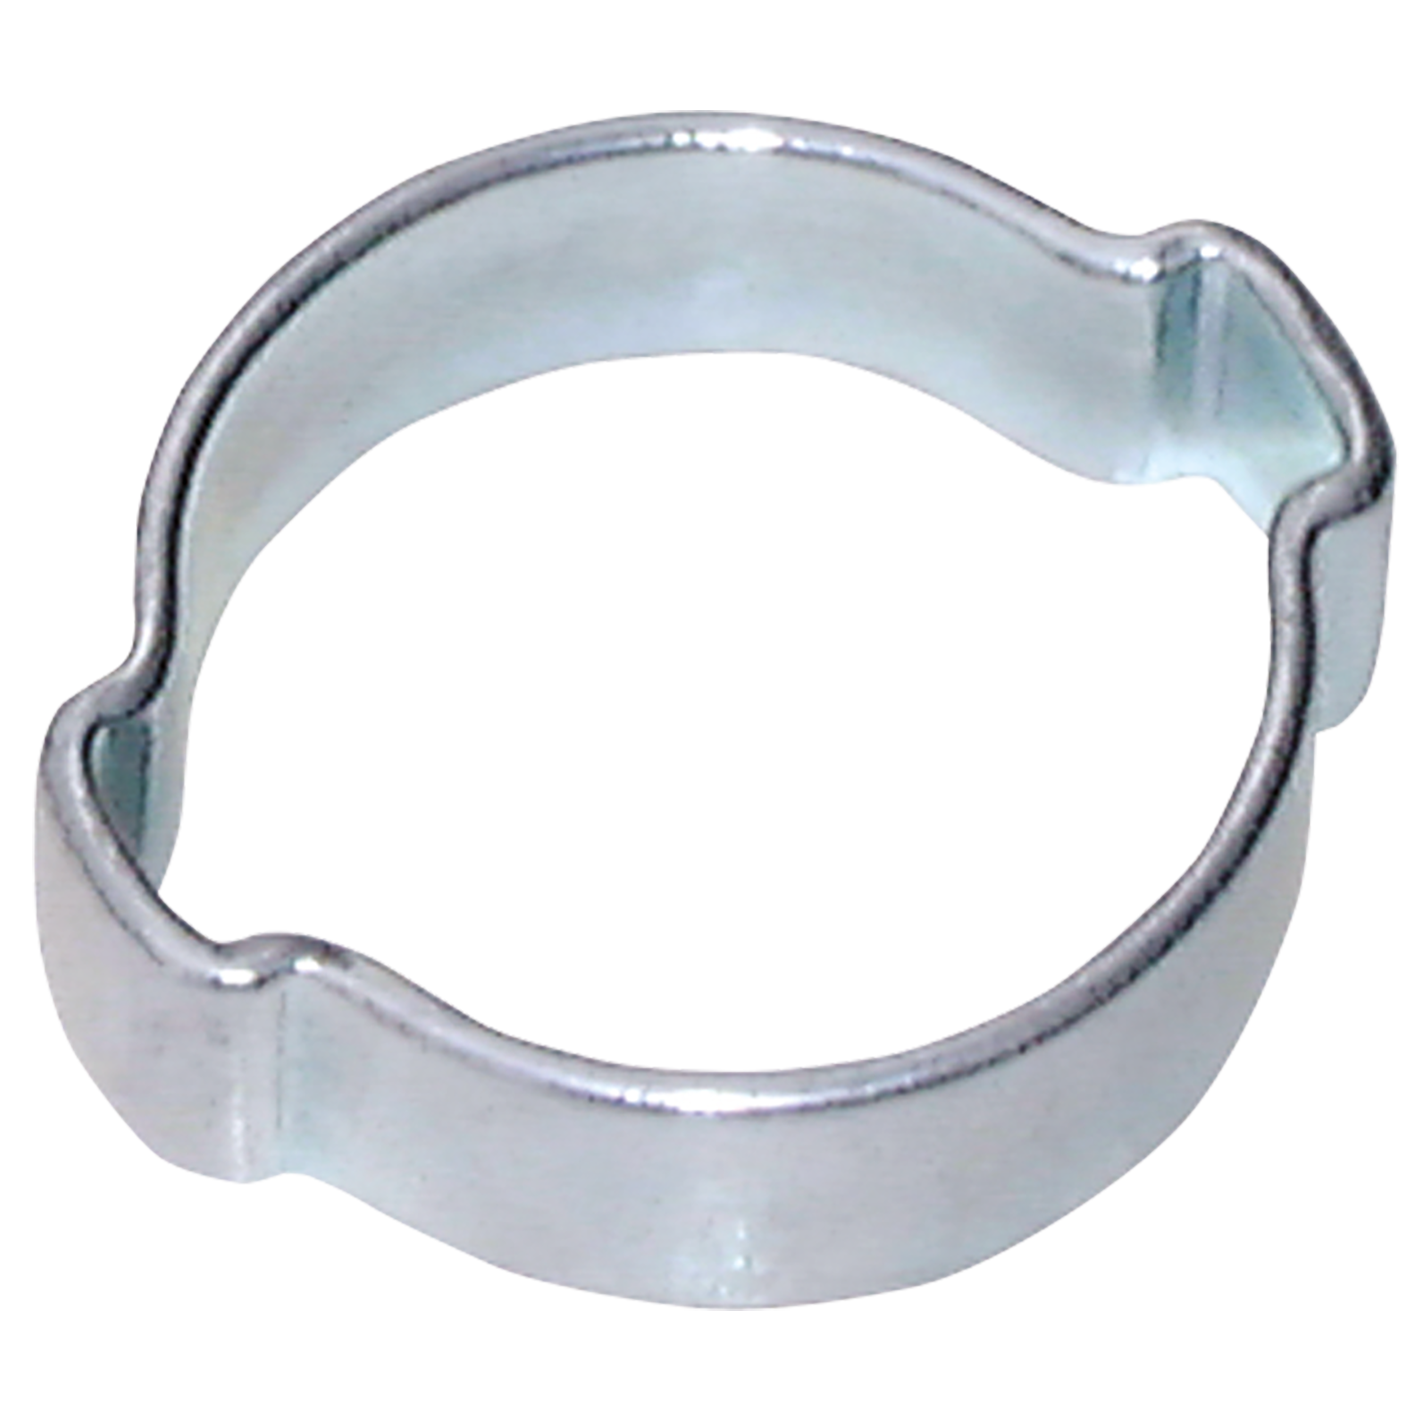 15.0-18.0MM 2-EAR STEEL CLAMP PLATED